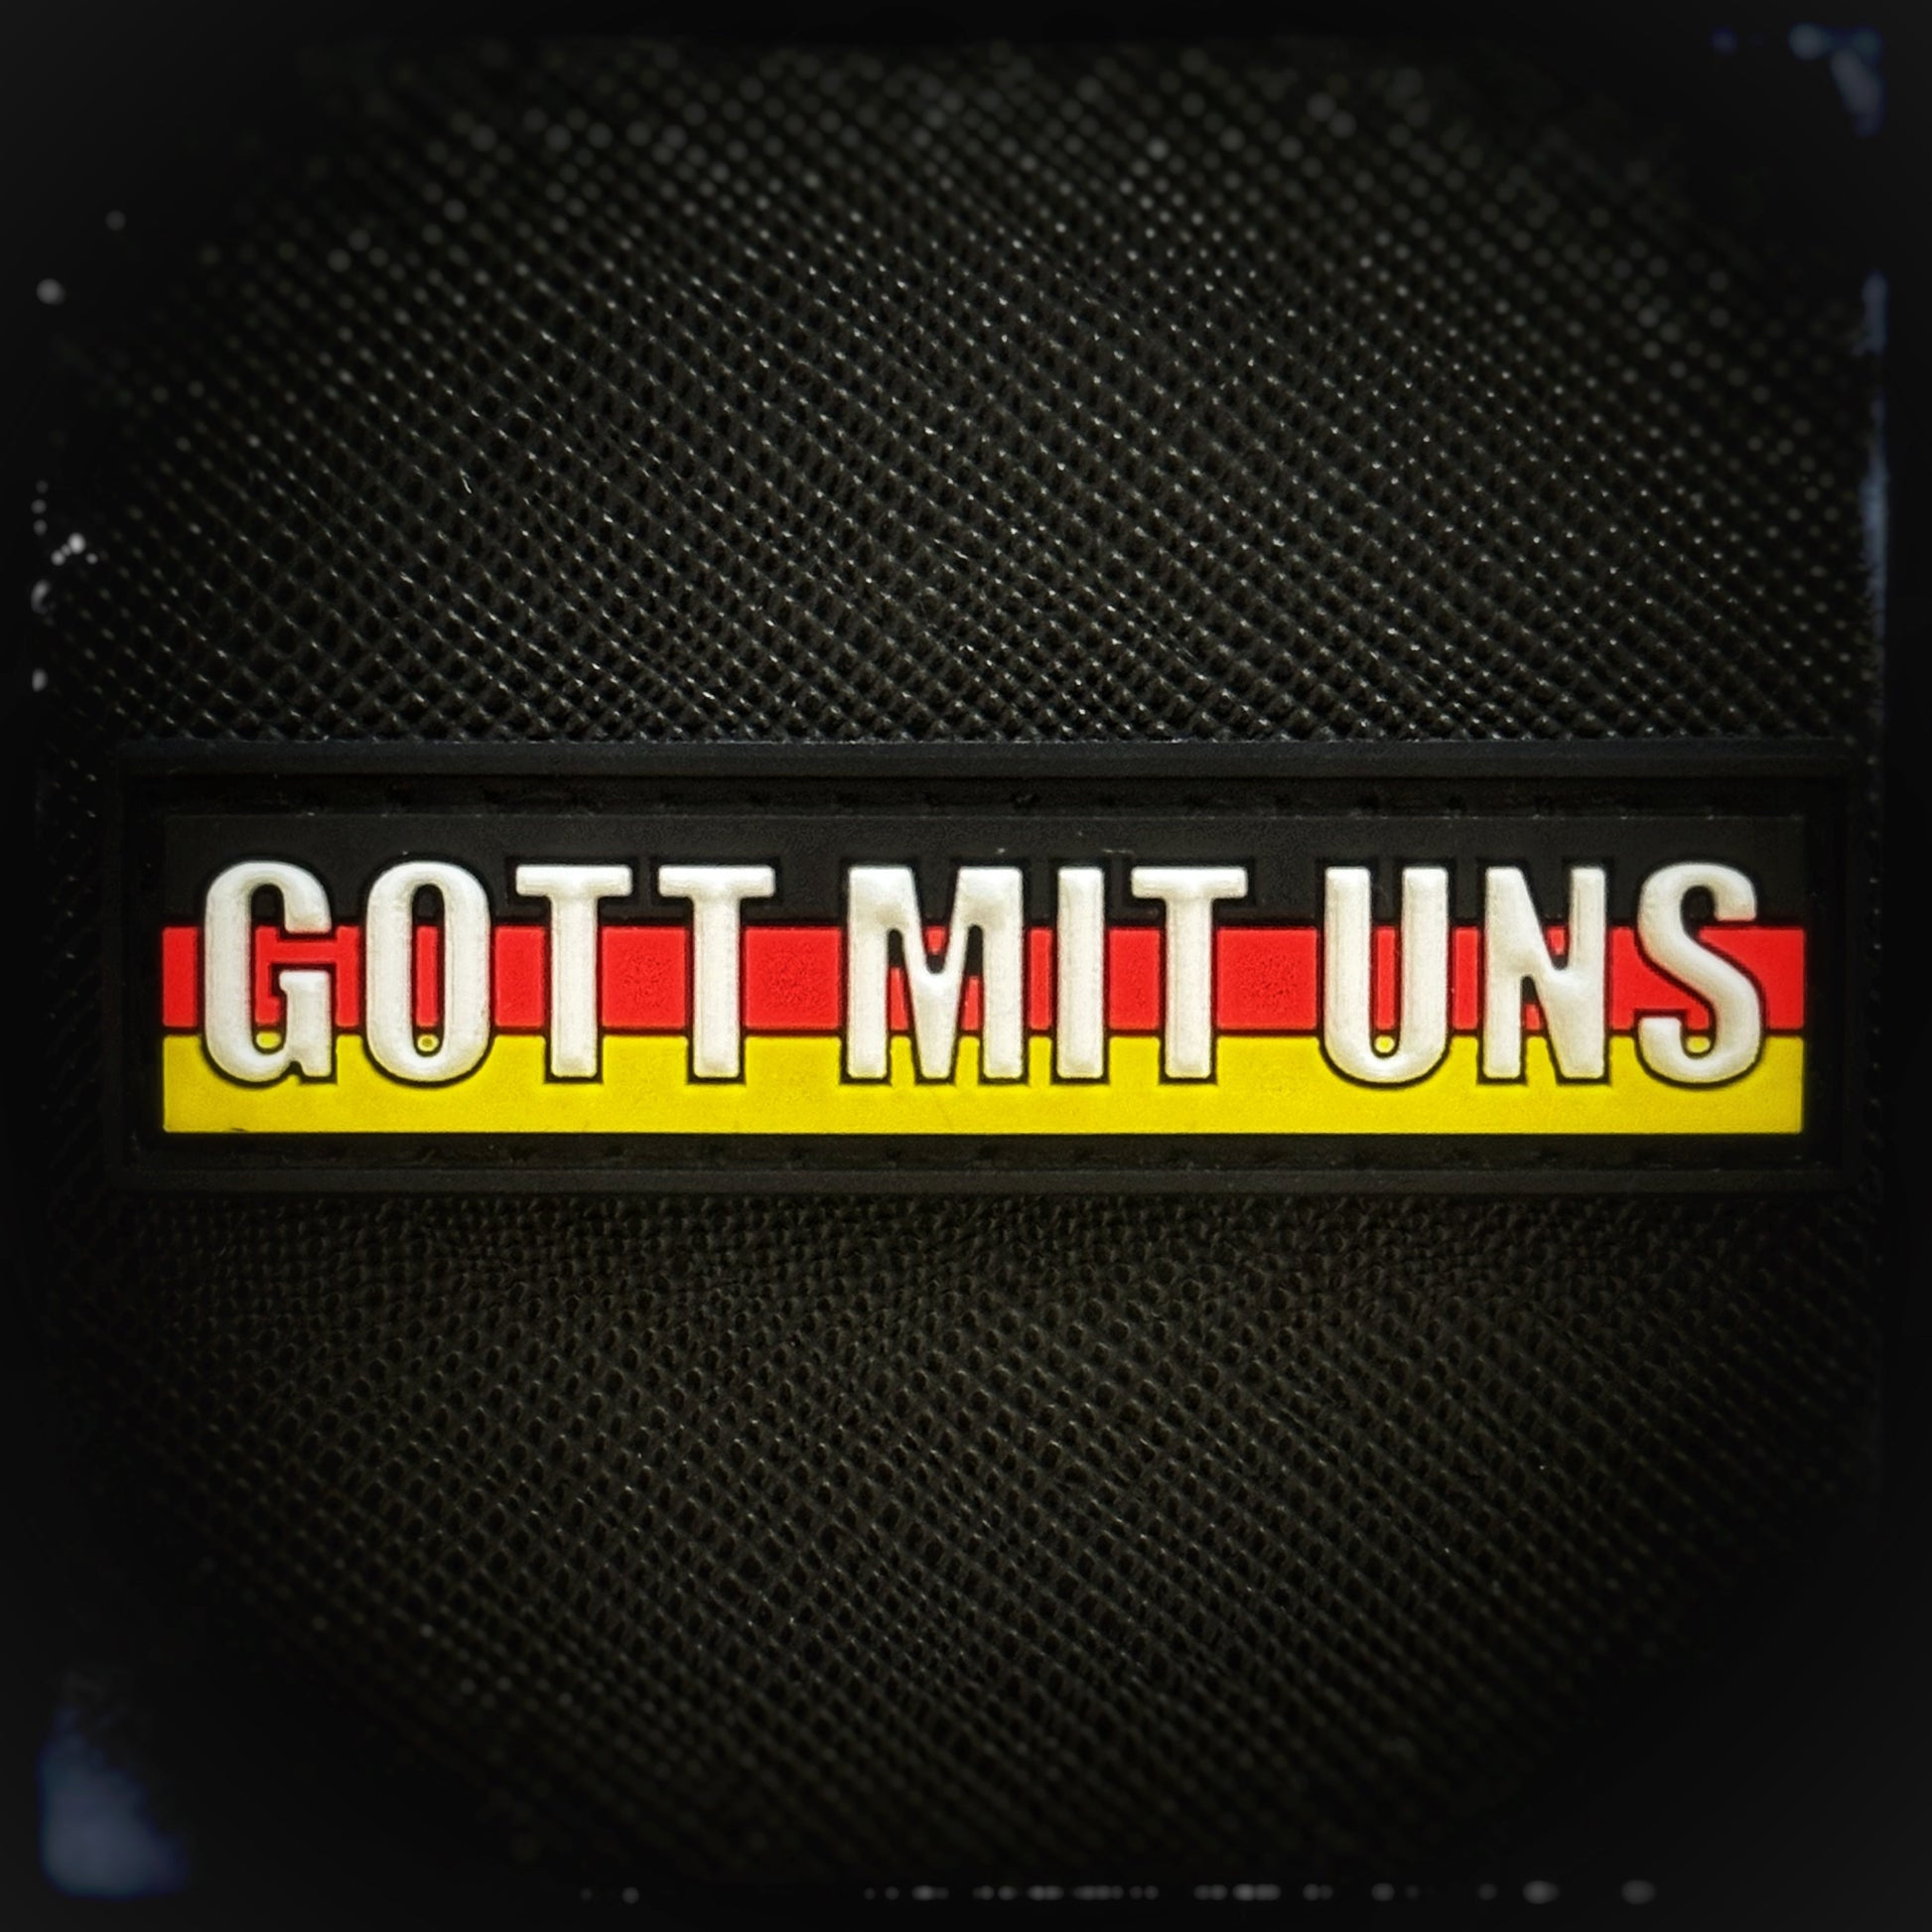 3D PVC Patch with Velcro: Gott mit uns (1701 - 1970s)  High quality and durable PVC patch for collectors, airsofters and members of the military. Nobiscum deu was a war cry of the Roman Empire. It was adopted by the prussian army in 1701 and used by the germans until 1970s.